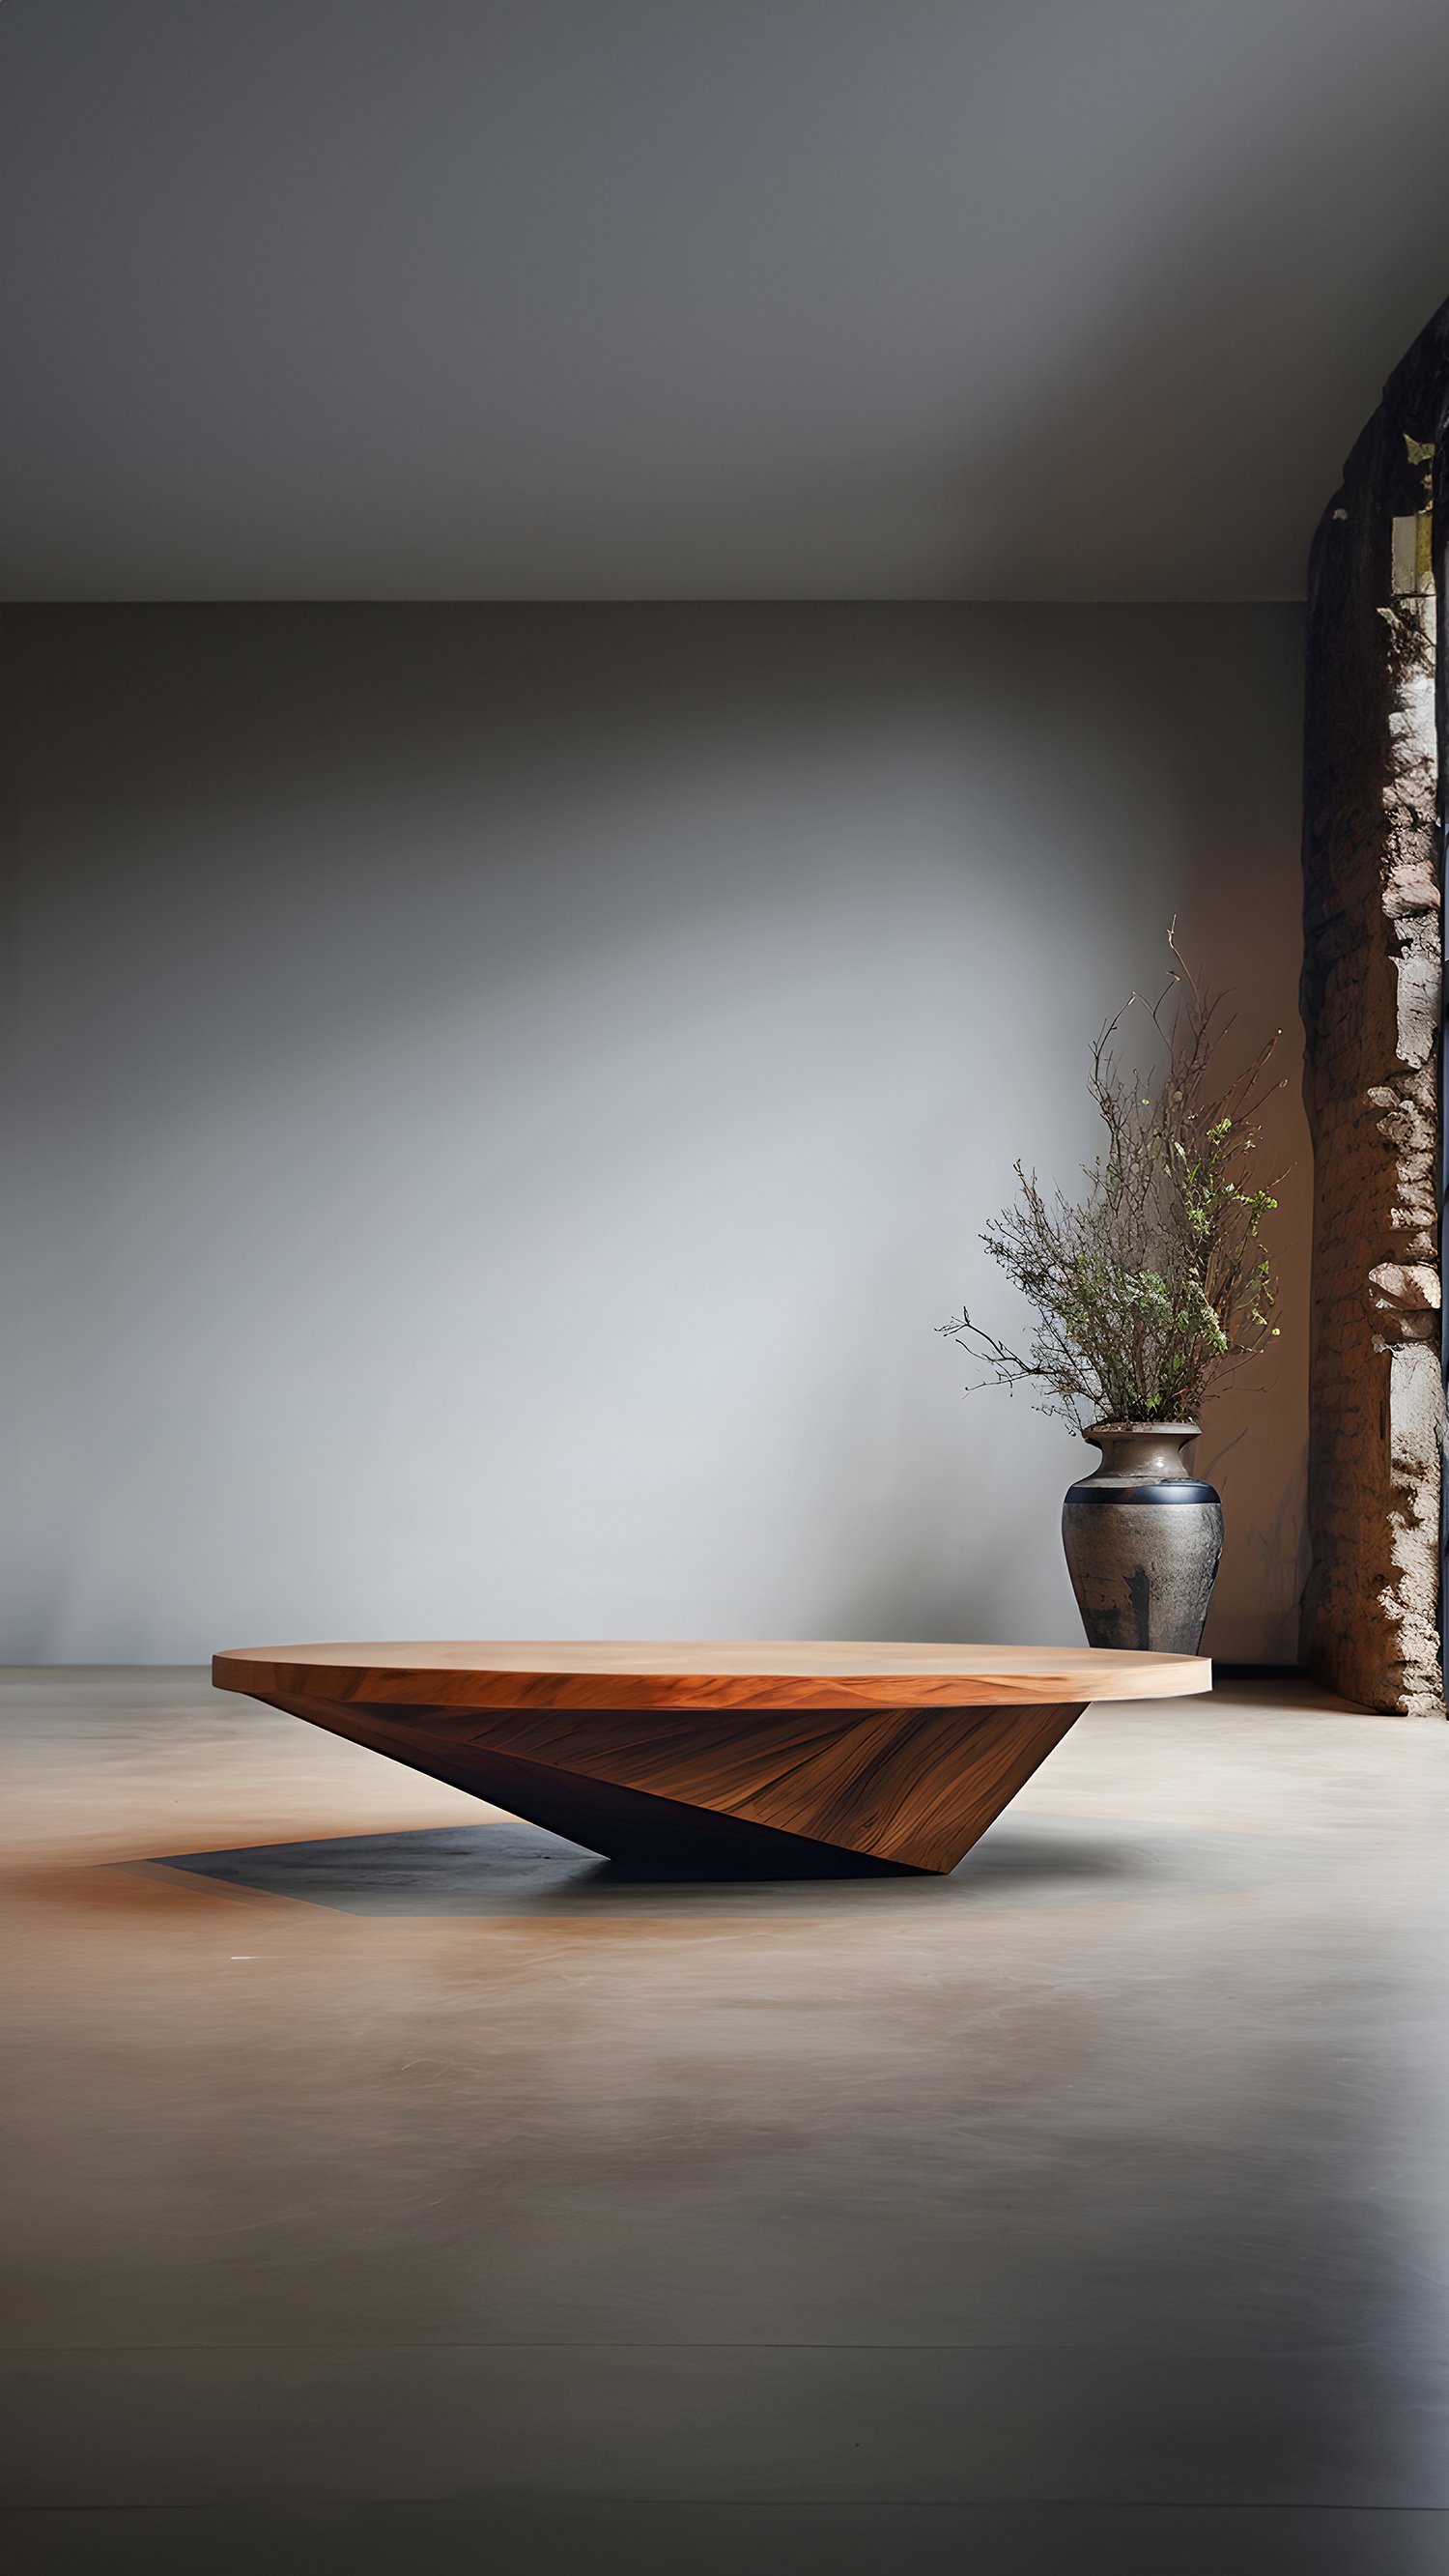 Sculptural Coffee Table Made of Solid Wood, Center Table Solace S12 by Joel Escalona — 6.jpg